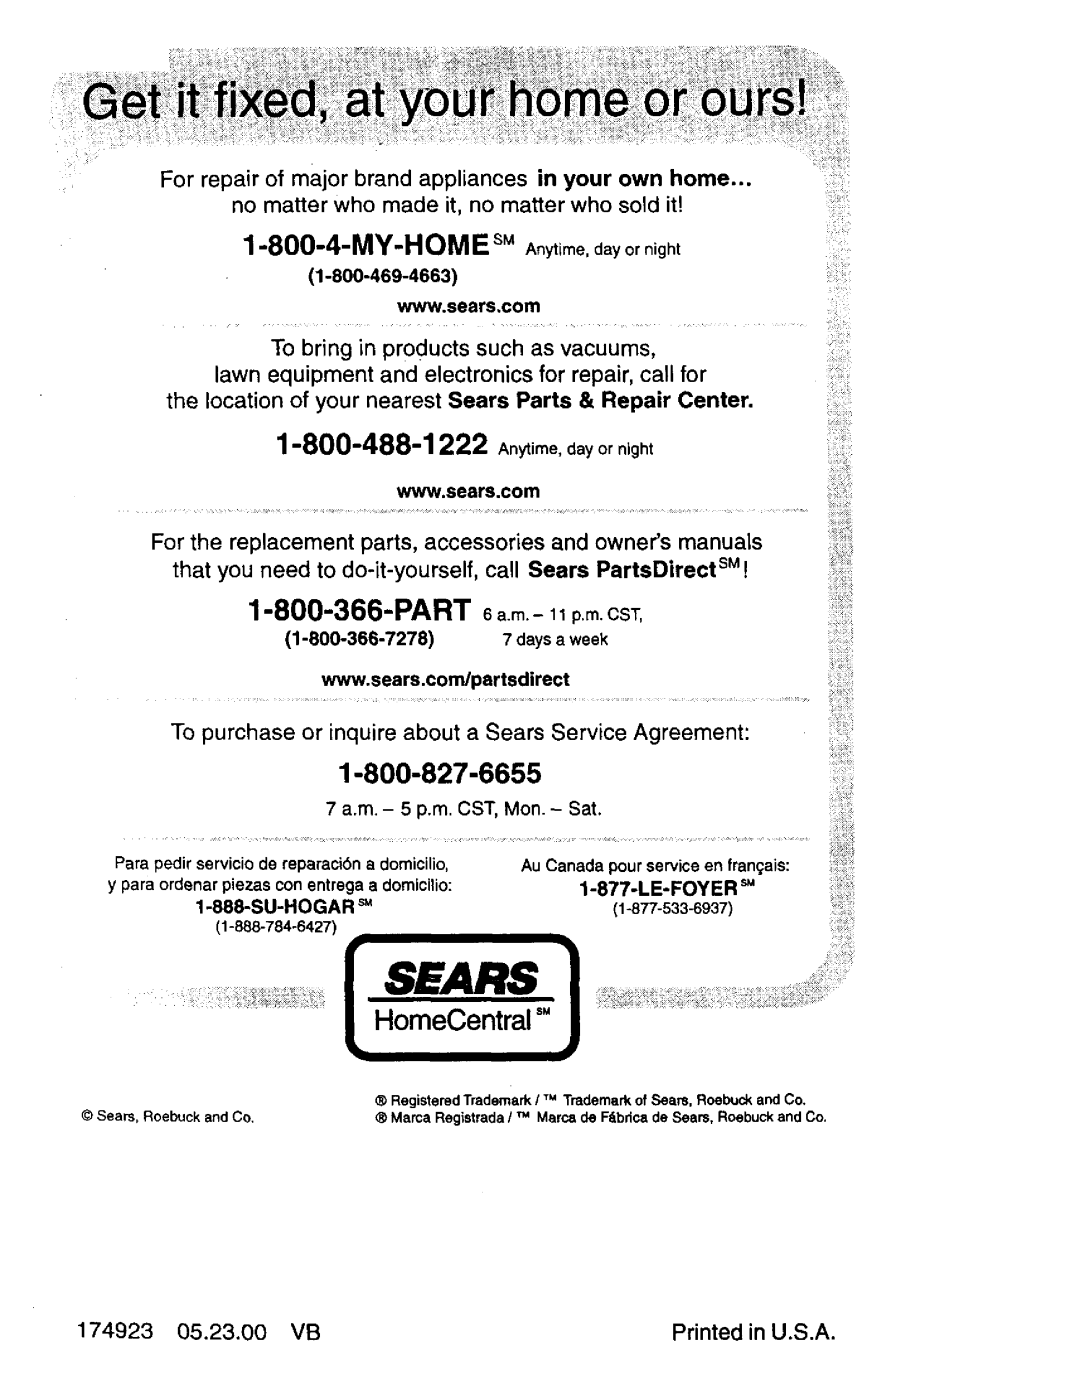 Craftsman 917.387258 owner manual HomeCentral, Sears, Anytime, day or night, 800 366 PART 6 a.m. - 11p.m. CST 